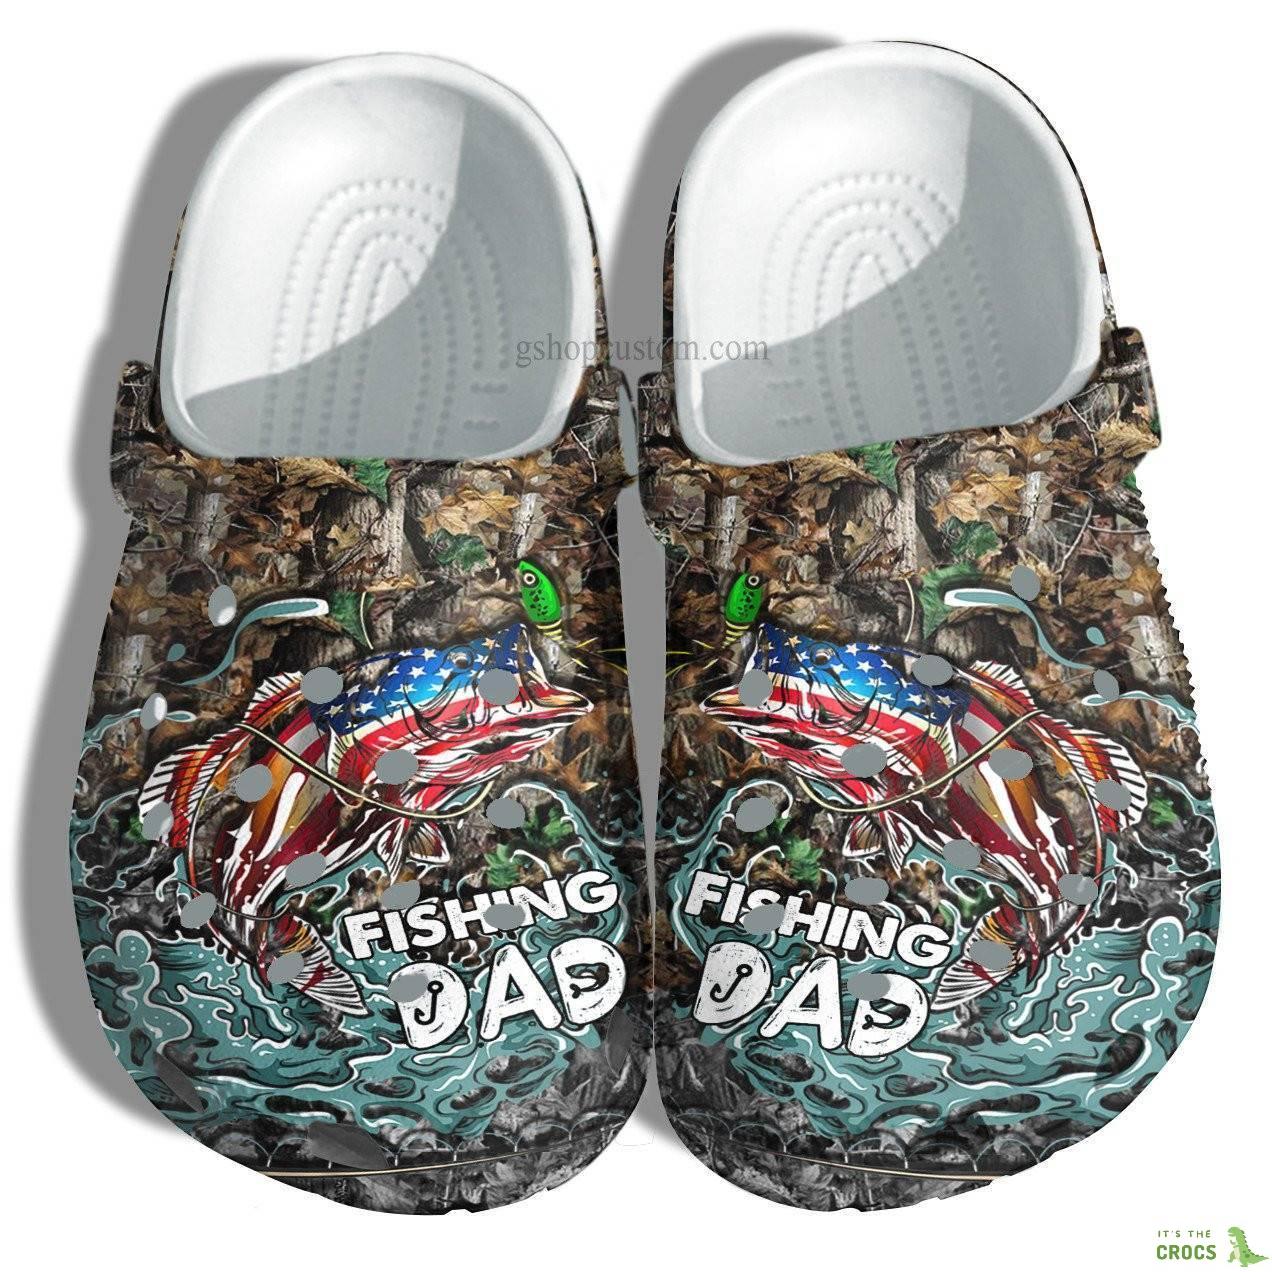 Fishing Dad Vintage Croc Shoes Gift Grandpa Father Day – Fishing Father Crocs Shoes Customize